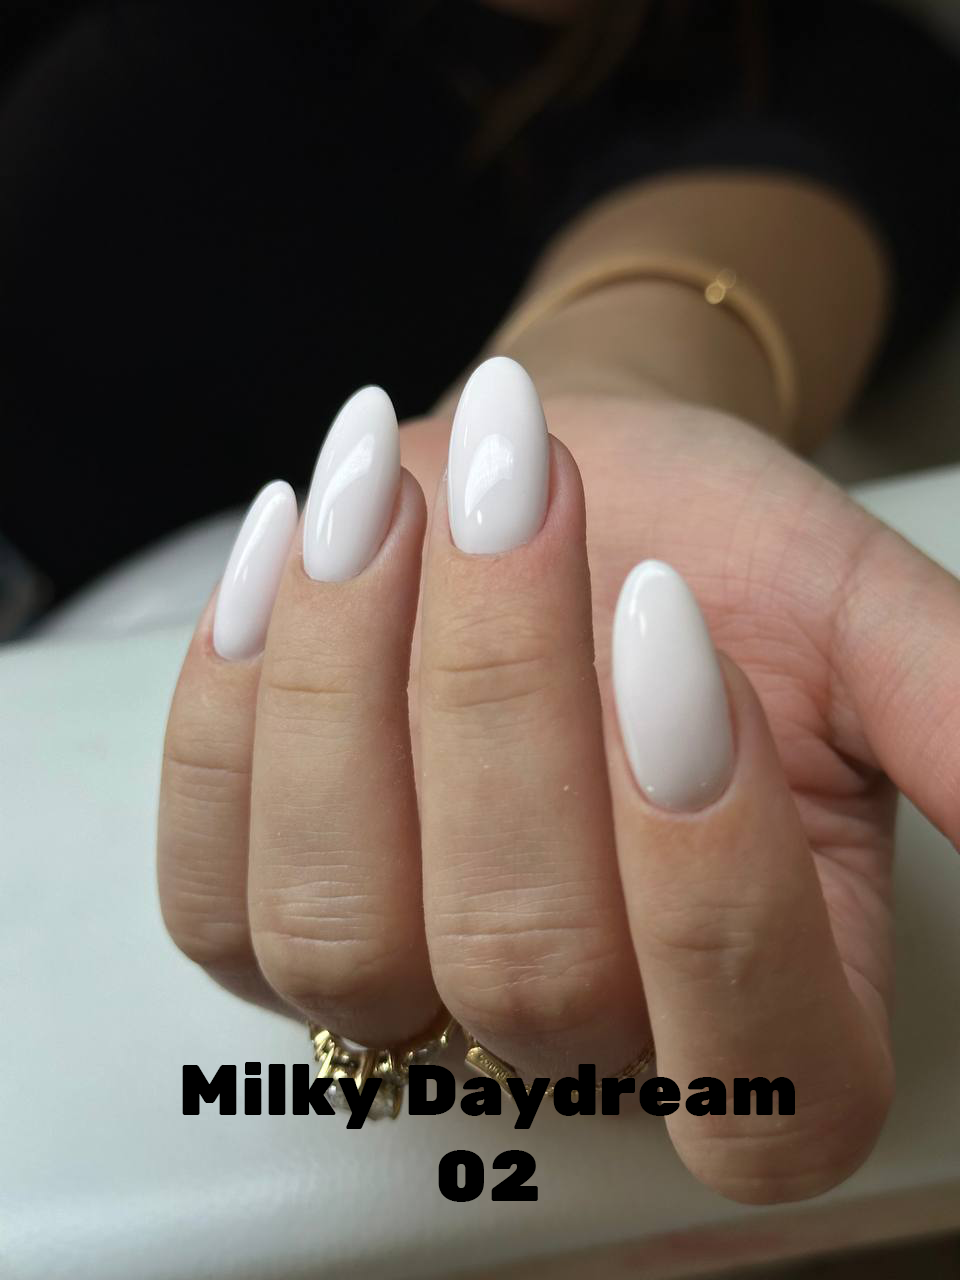 NEW! Milky Daydream Rubber Bases